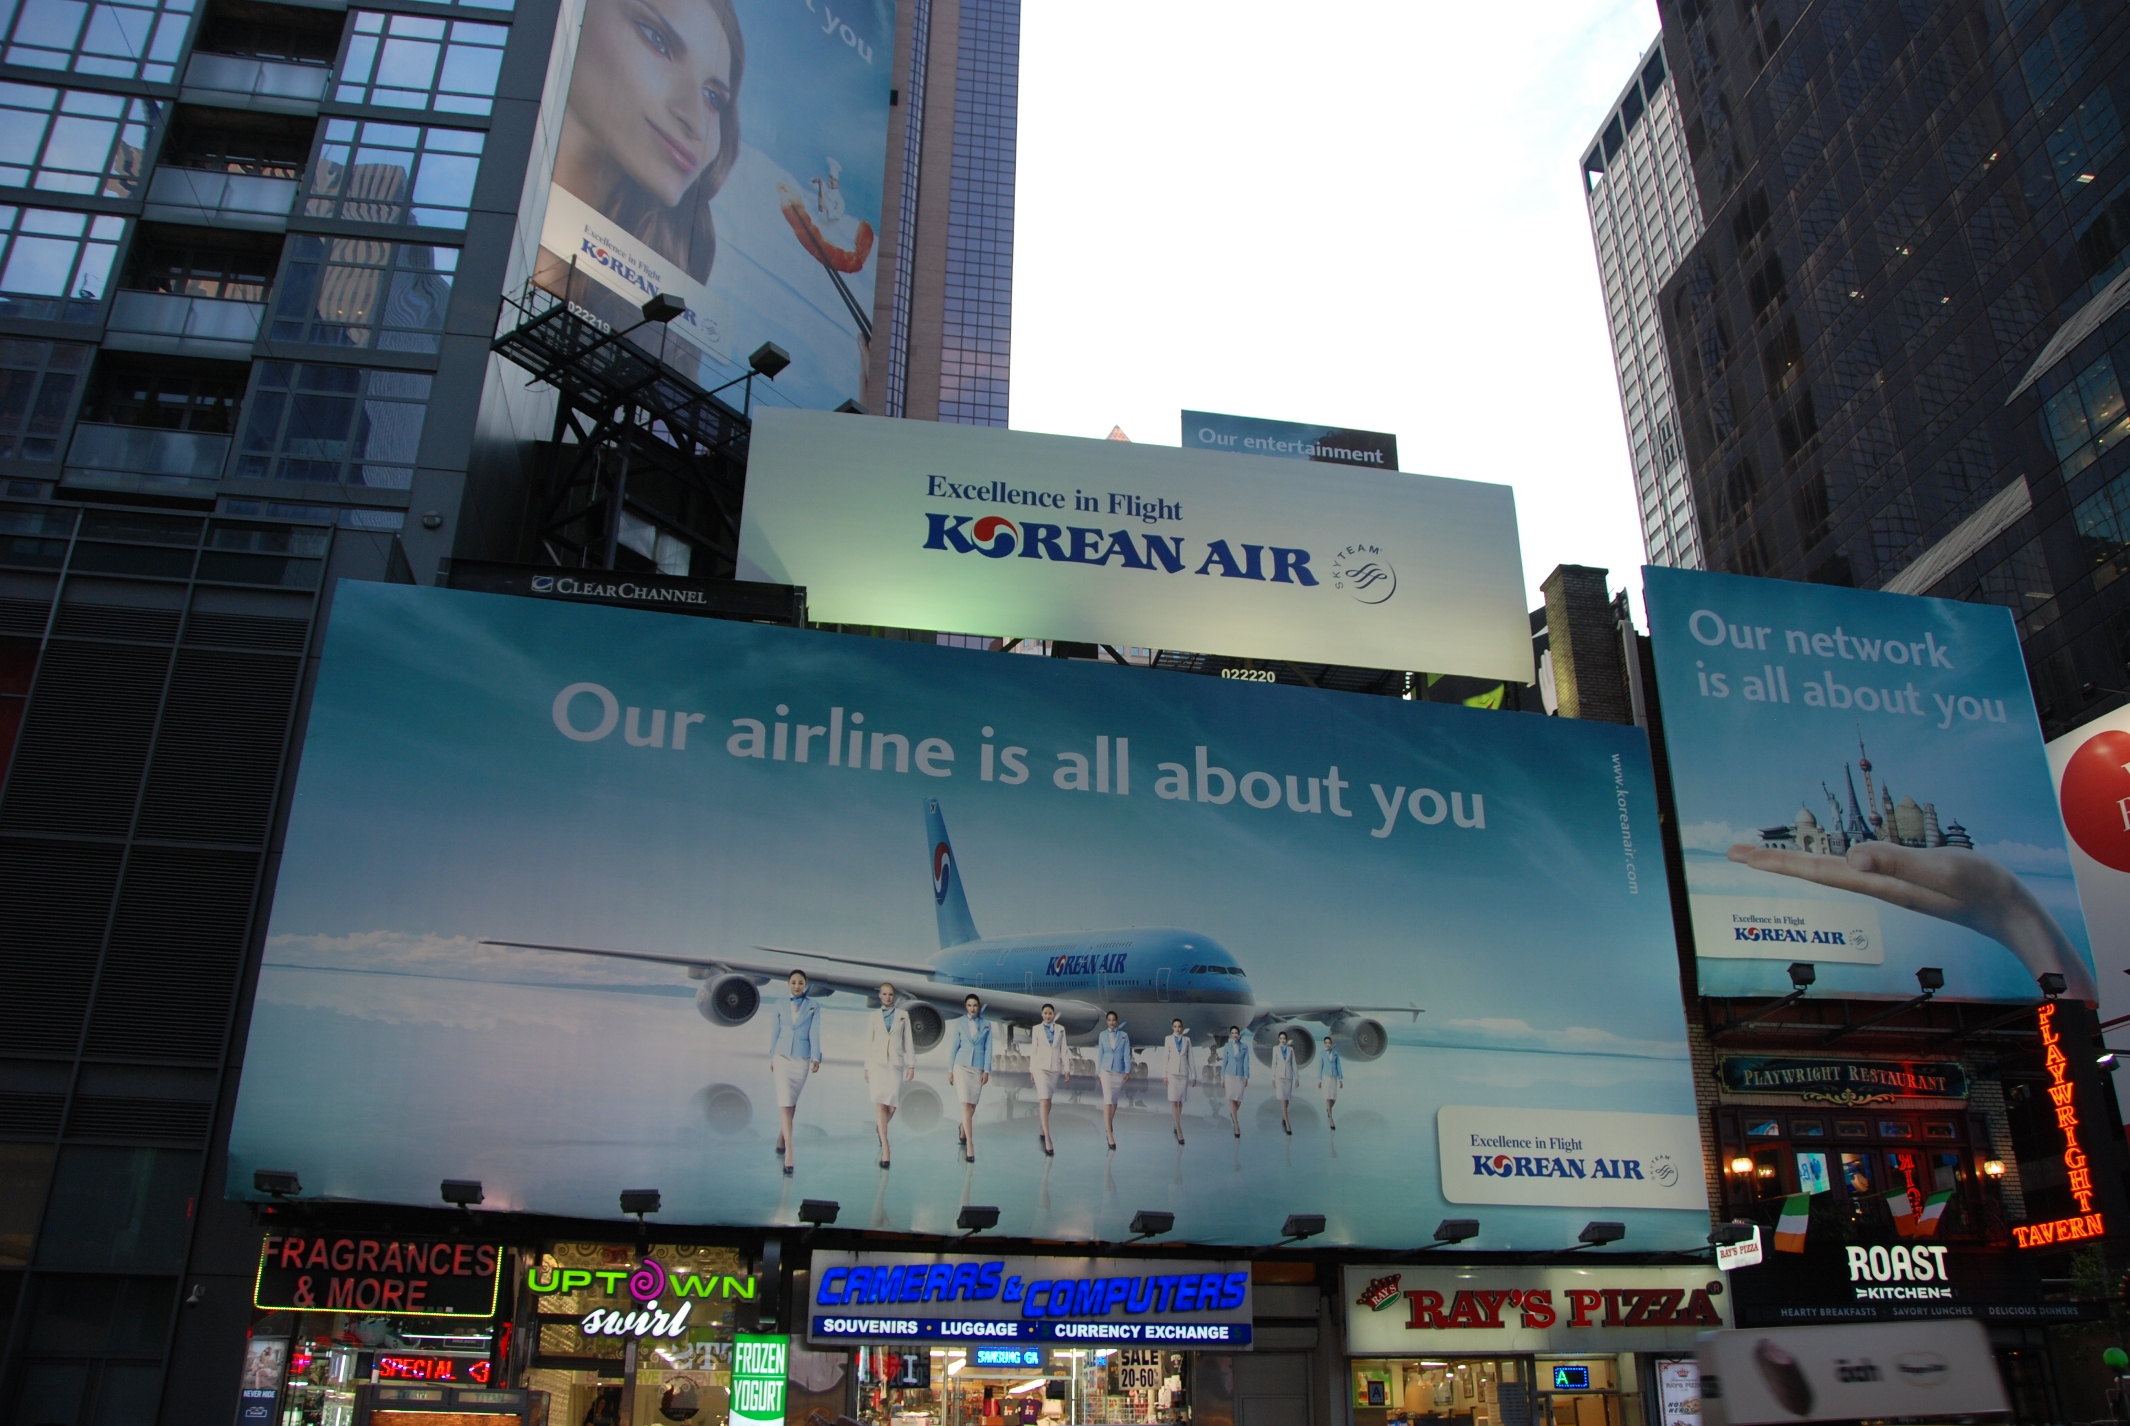 Korean Air: our airline is all about you